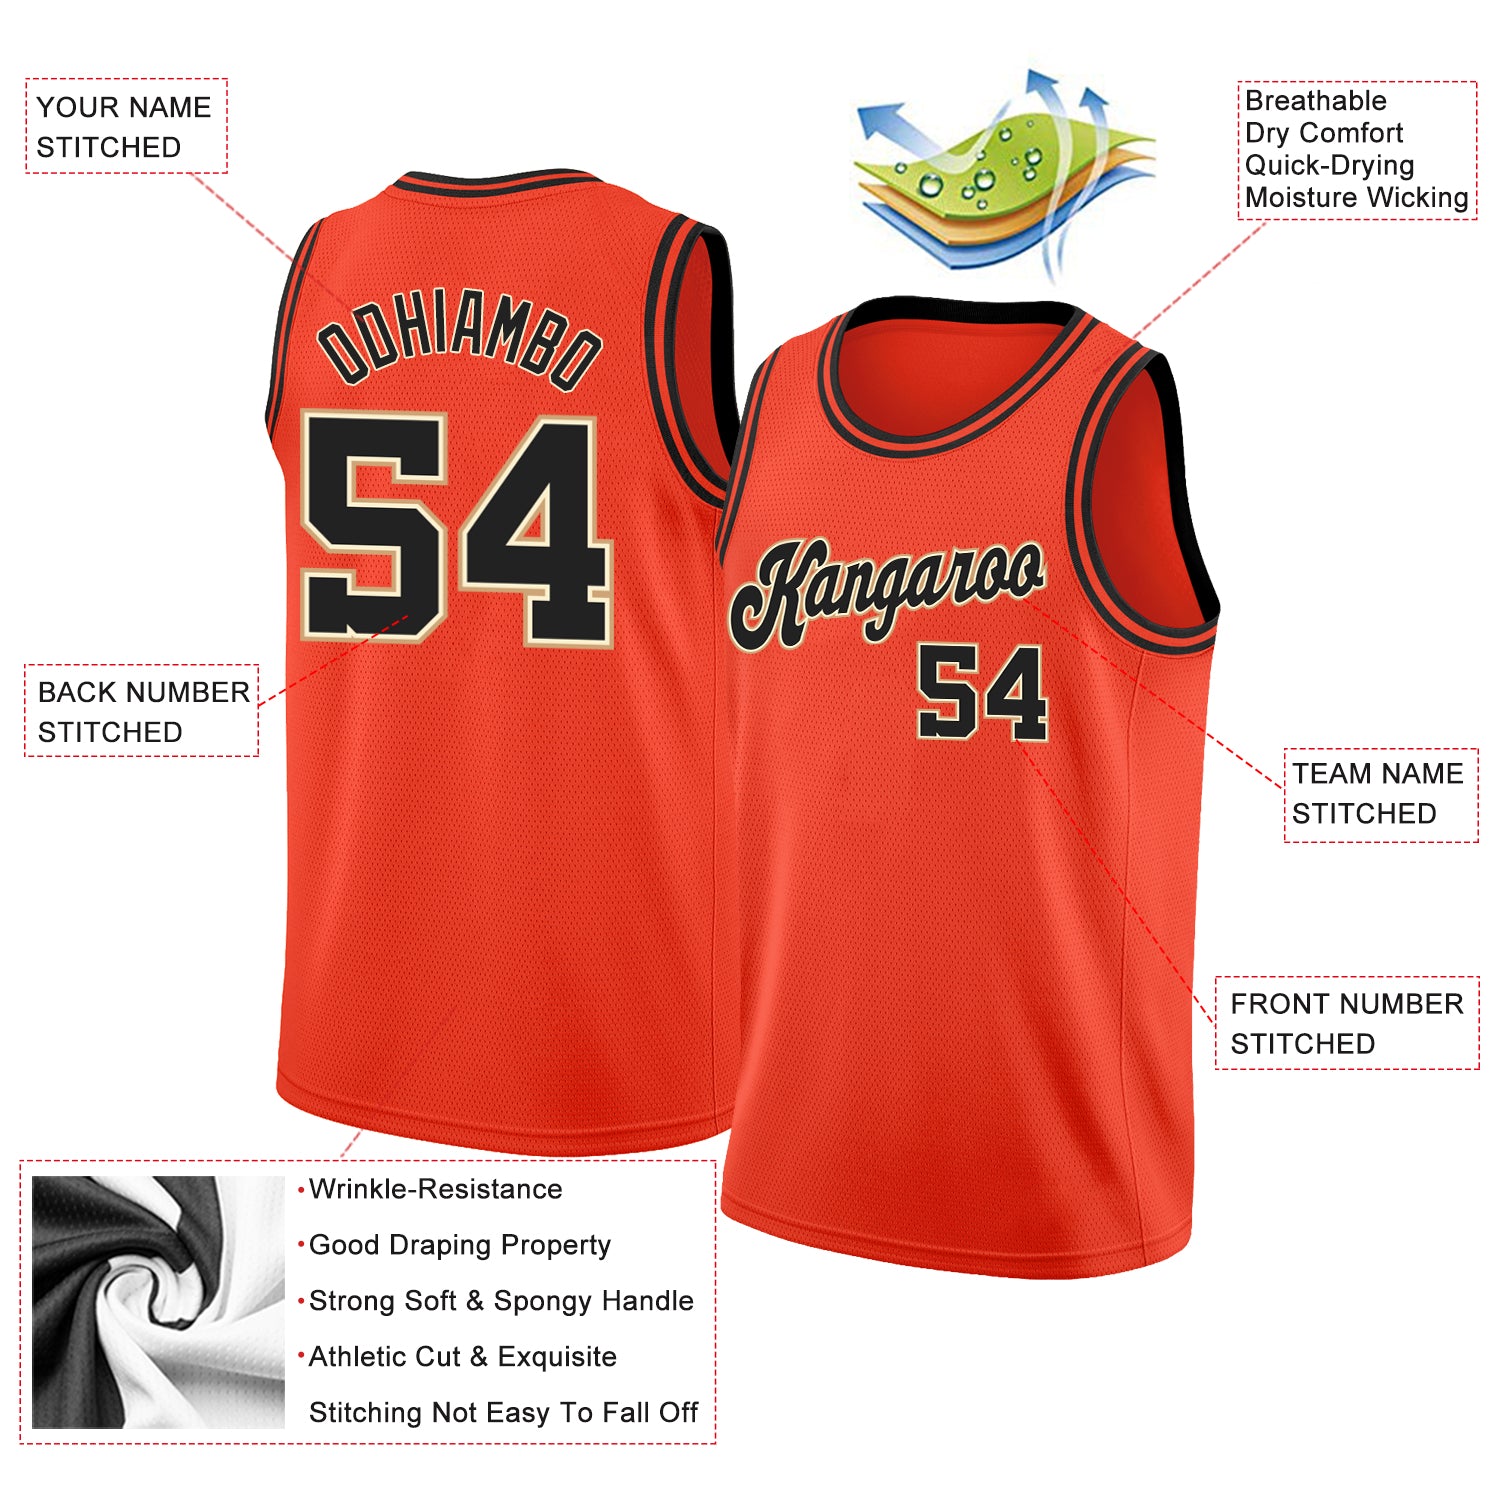 BASKETBALL CHICAGO JERSEY FREE CUSTOMIZE OF NAME AND NUMBER full sublimation  high quality fabrics/ trending jersey